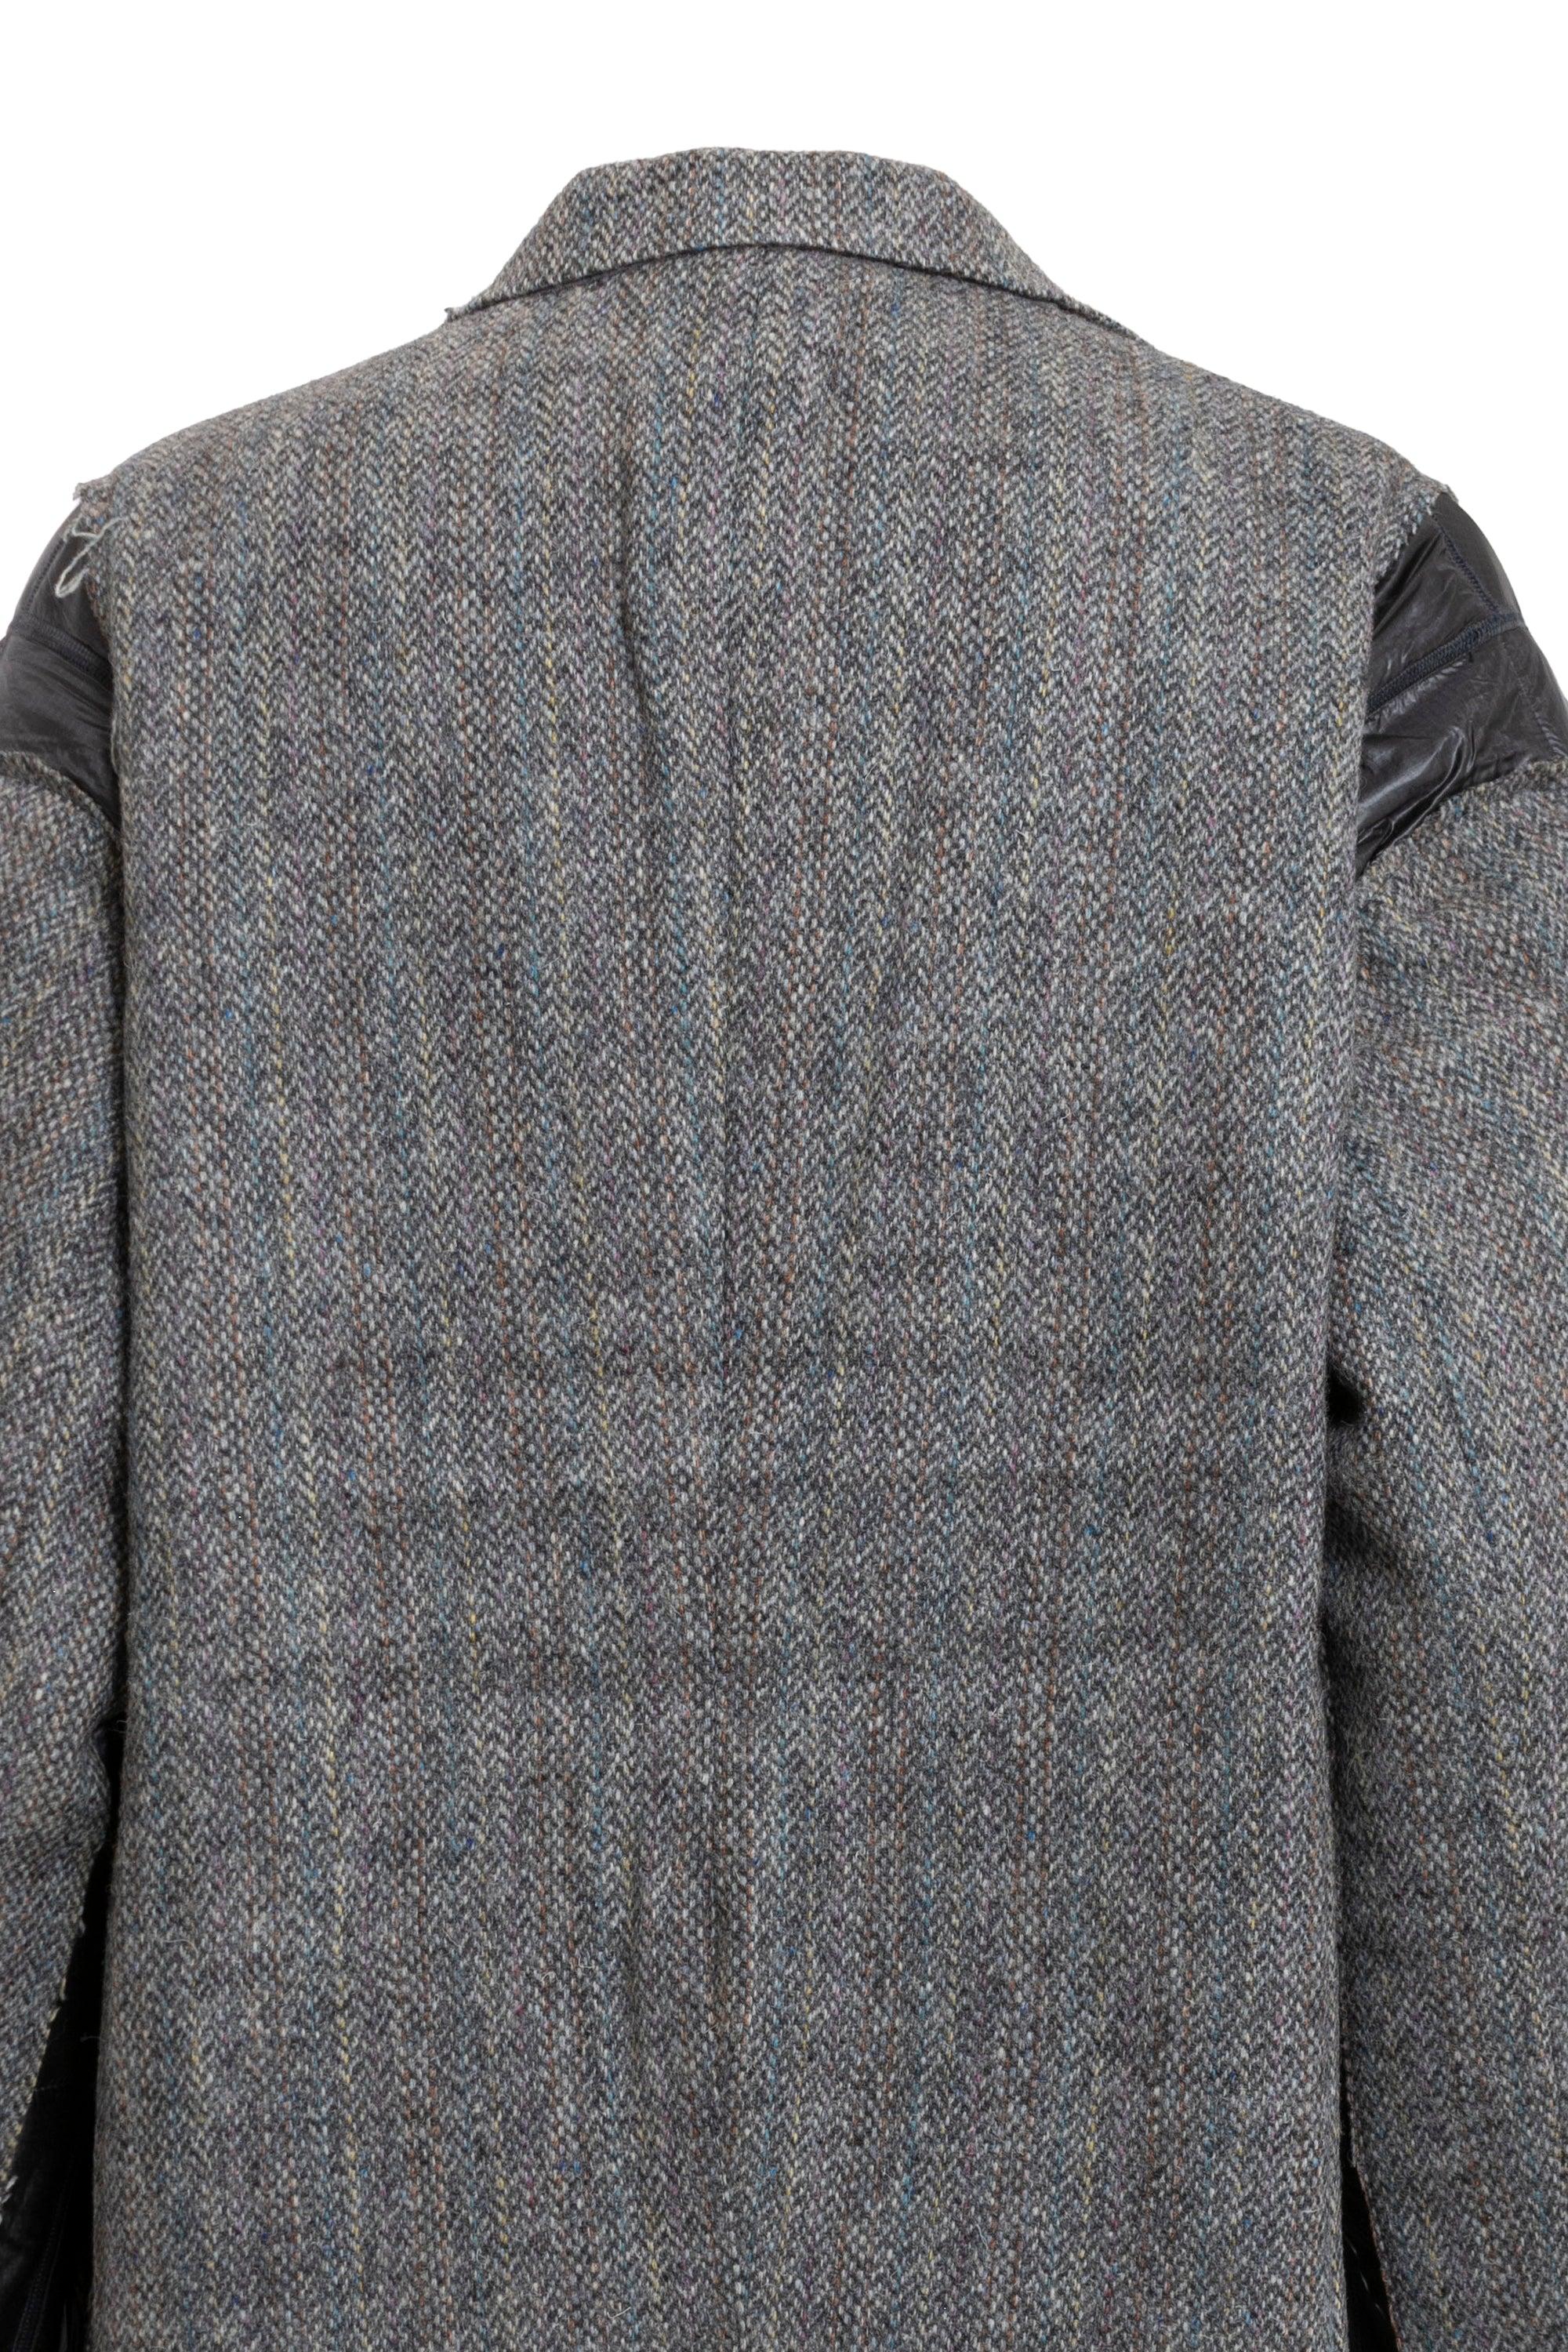 Rebuild by Needles Tweed Jacket -> Covered Coat in Gray for Men | Lyst